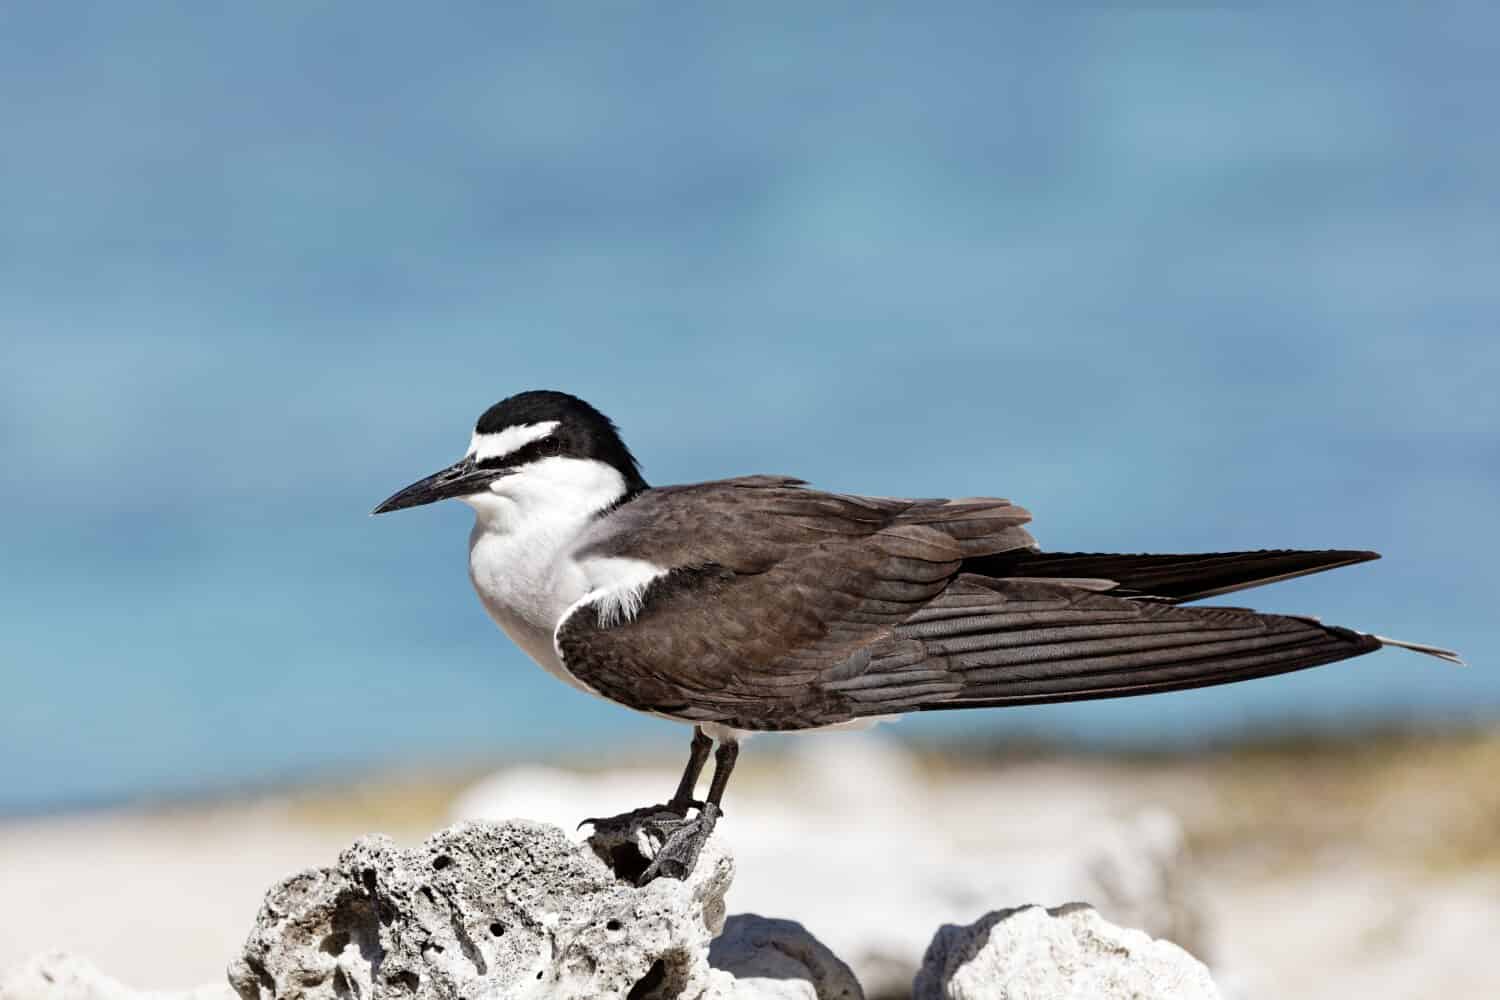 Sooty tern stands on a coral on the beach